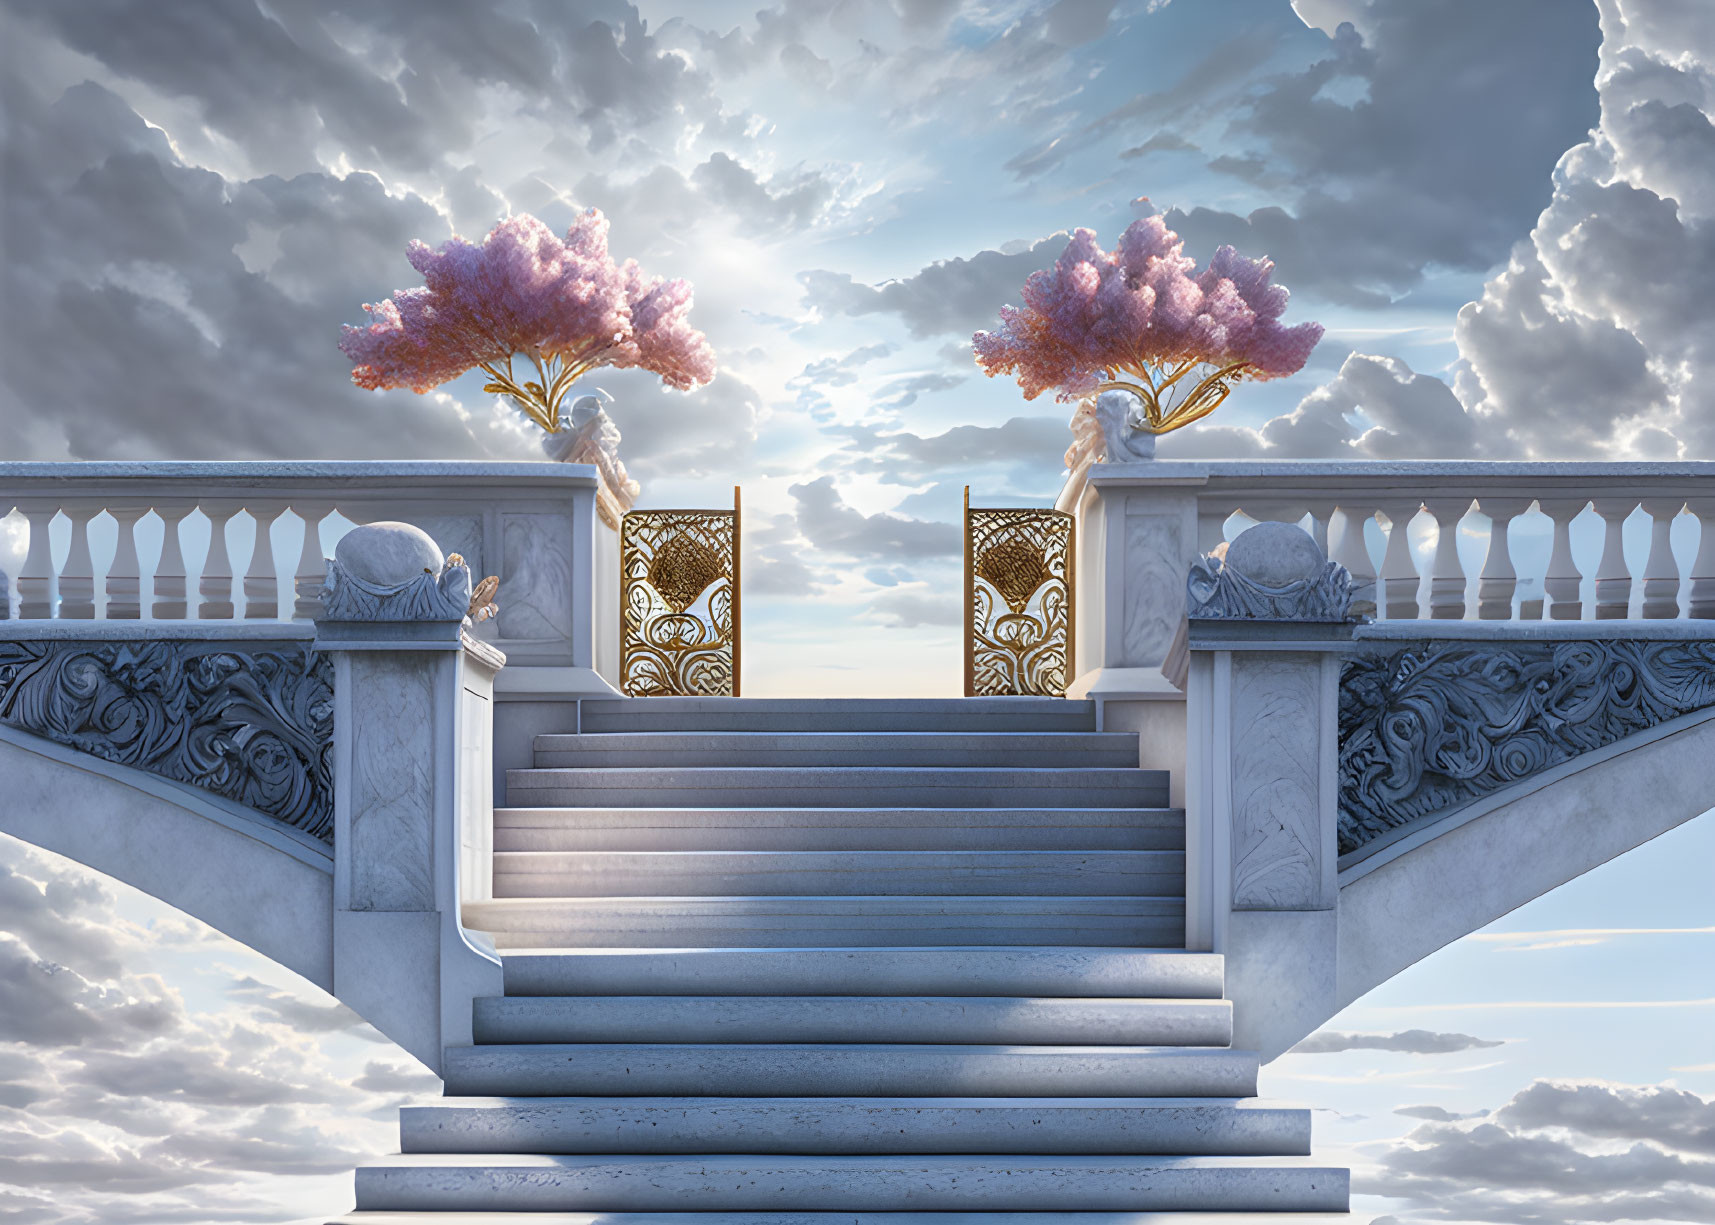 Surreal staircase with ornate railings and pink trees under cloudy sky